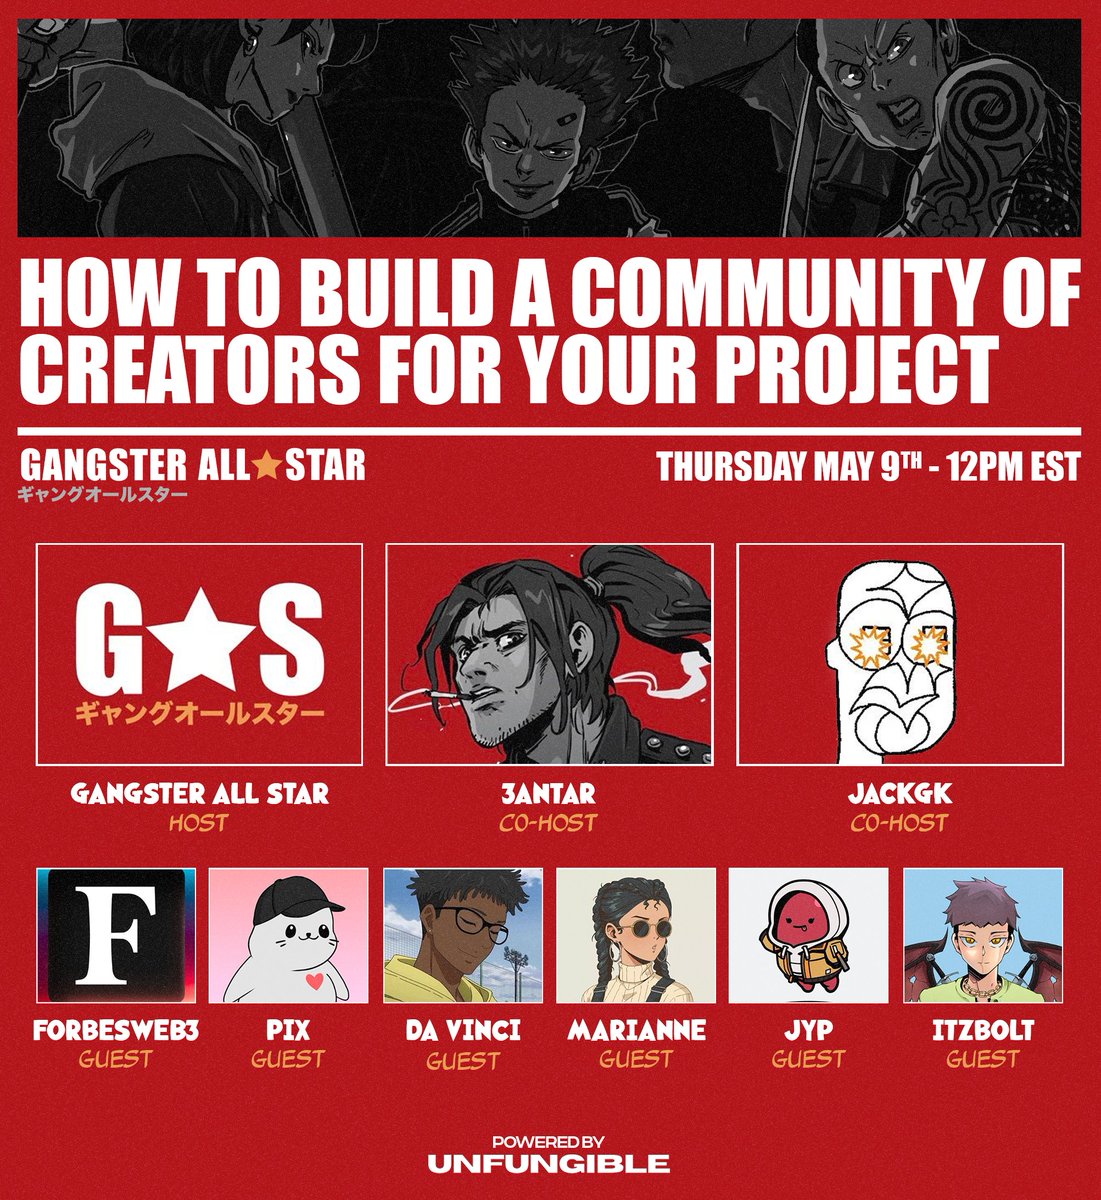 HOW TO BUILD A COMMUNITY OF CREATORS FOR YOUR PROJECT? 

Take a deep dive in our Spaces this Thursday 12PM EST alongside our panelists!

Powered by Unfungible.